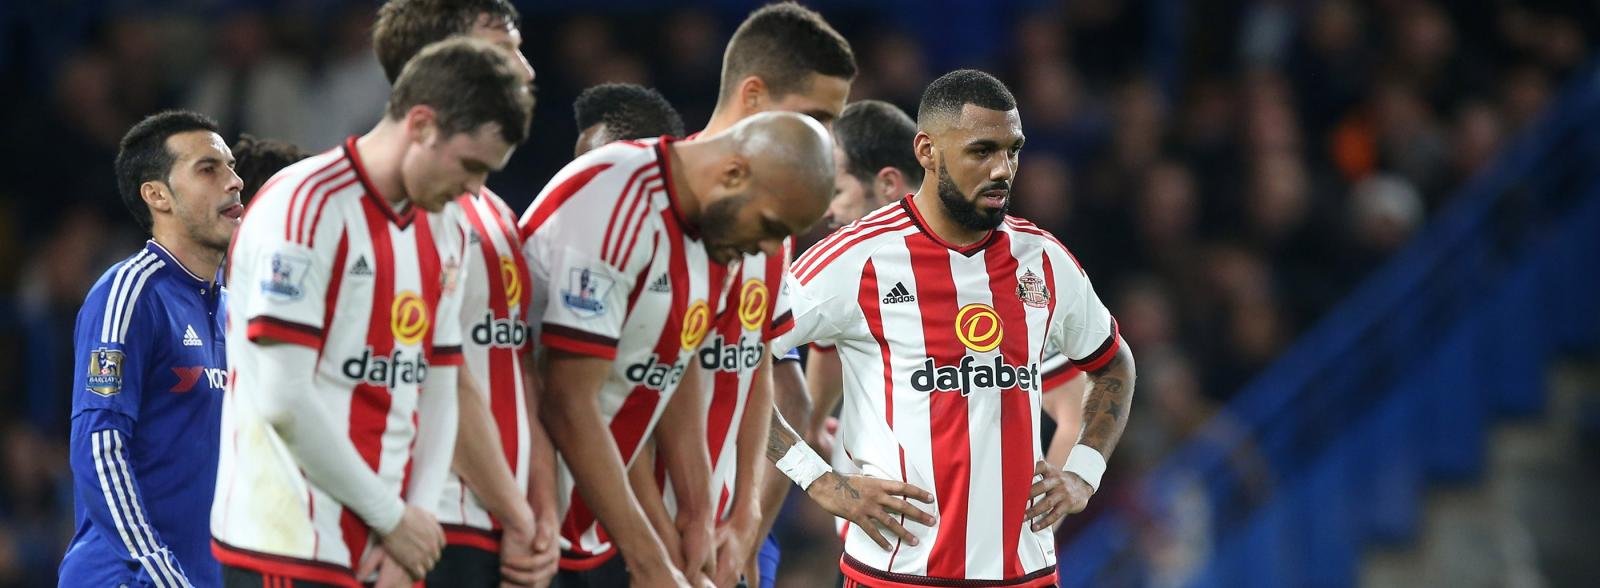 Sunderland need more than a miracle if they are to stay up